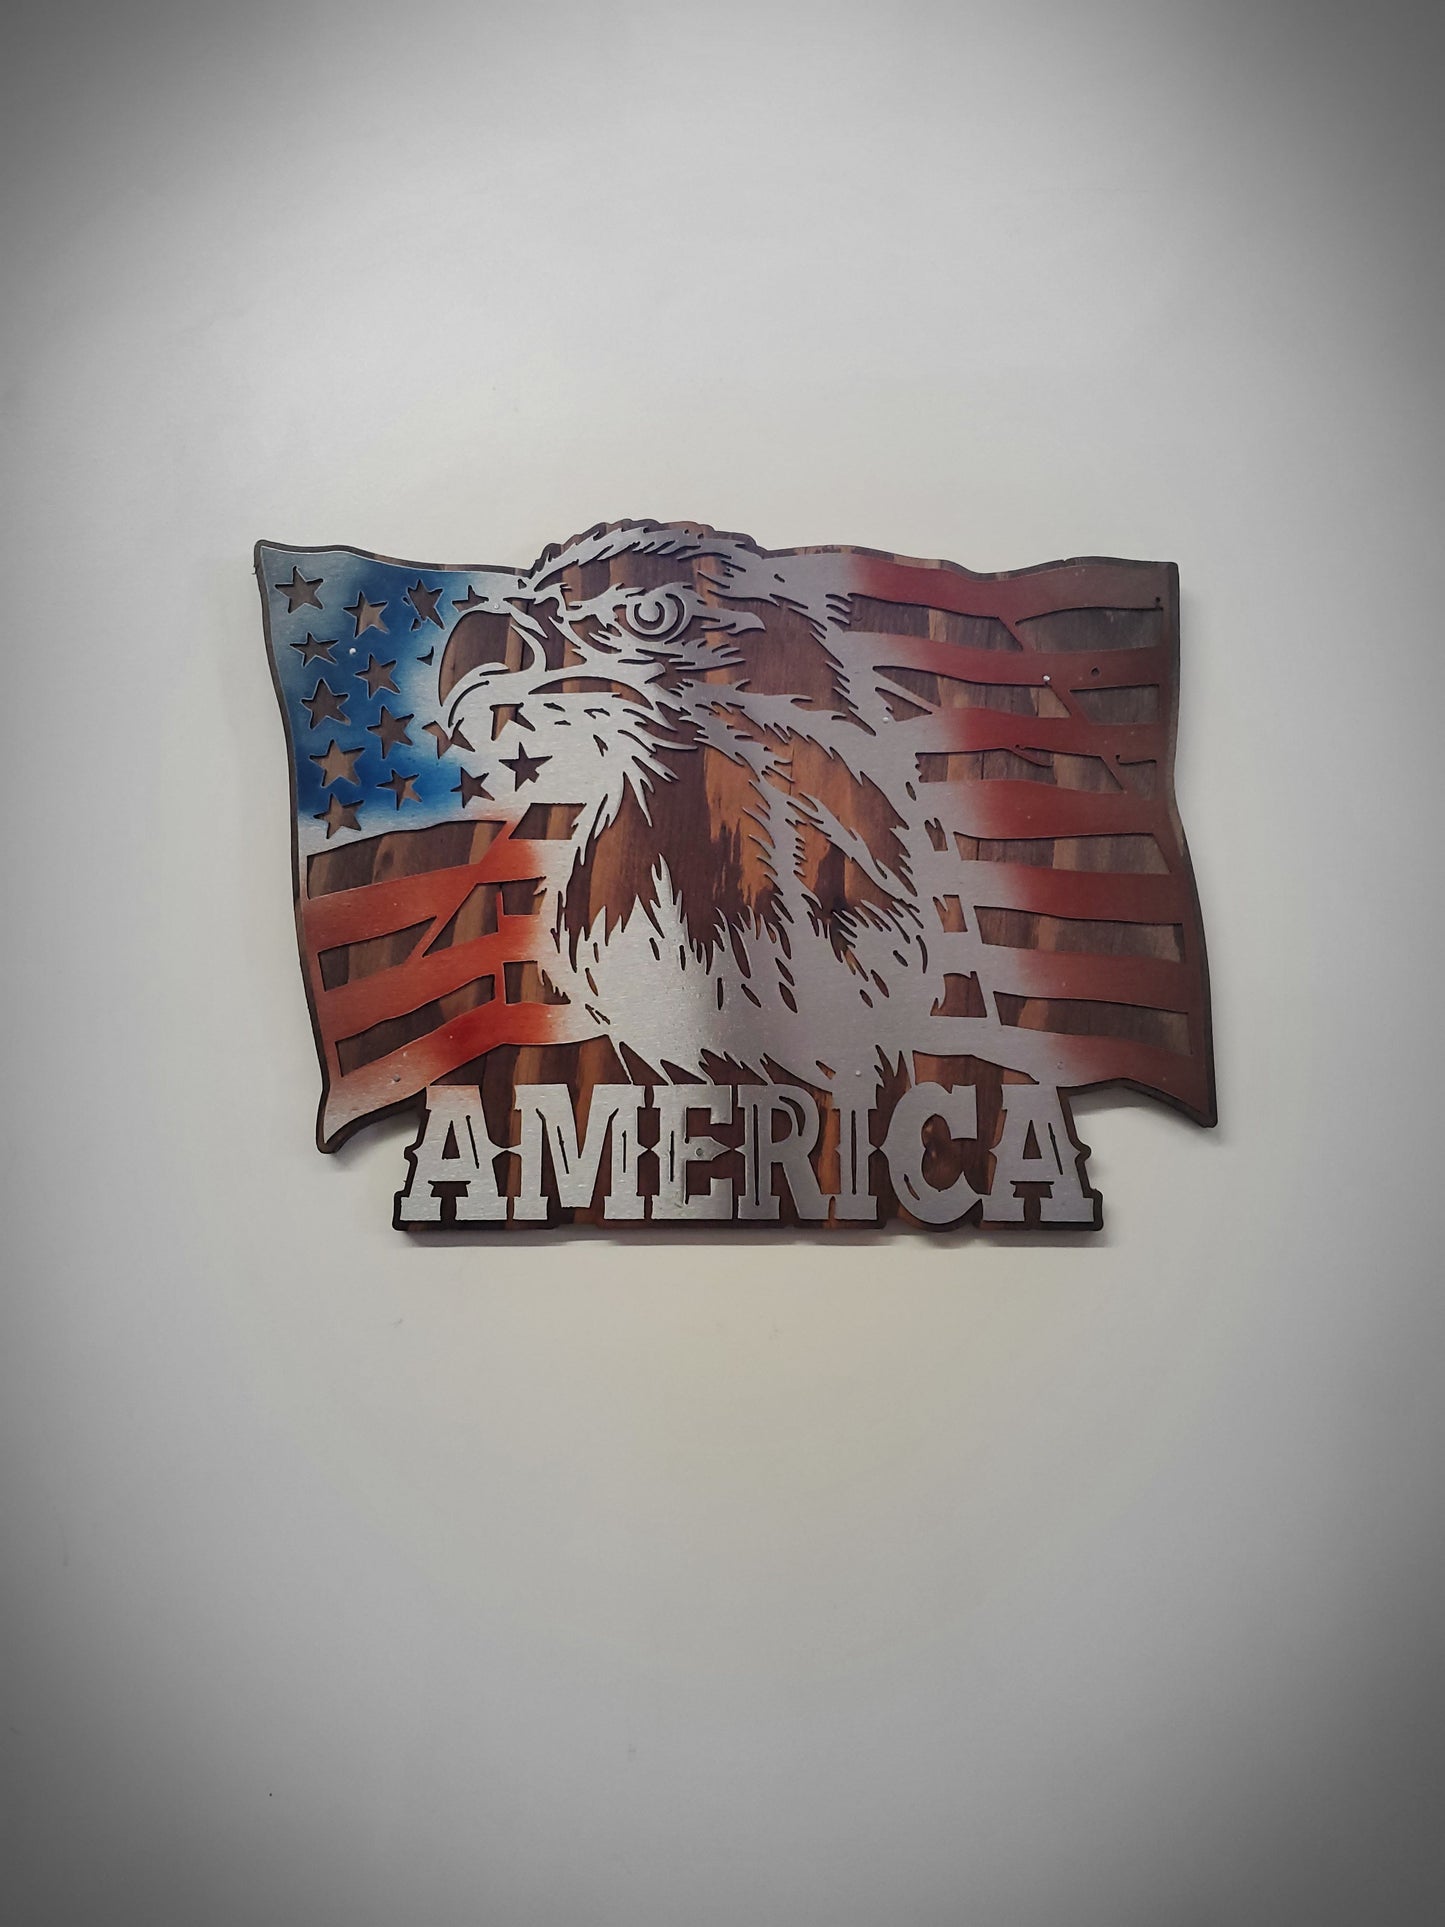 American Flag with Eagle Metal Wall Art | U.S. History Stars & Stripes Americana Wall Plaque Gift | Made in USA of Rustic Wood and Steel